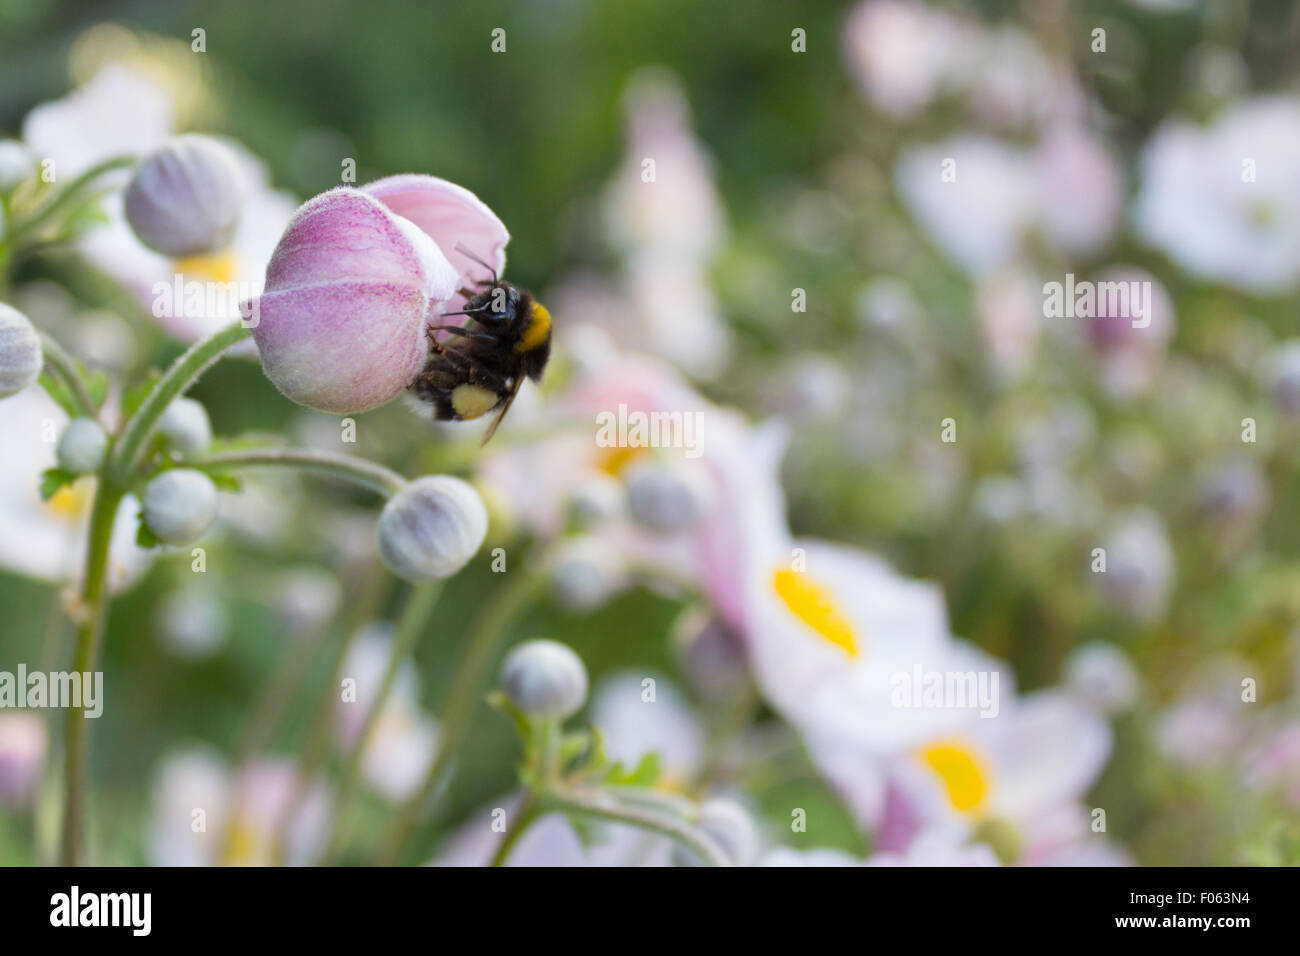 bumblebee on flower blossom / spring meadow Stock Photo